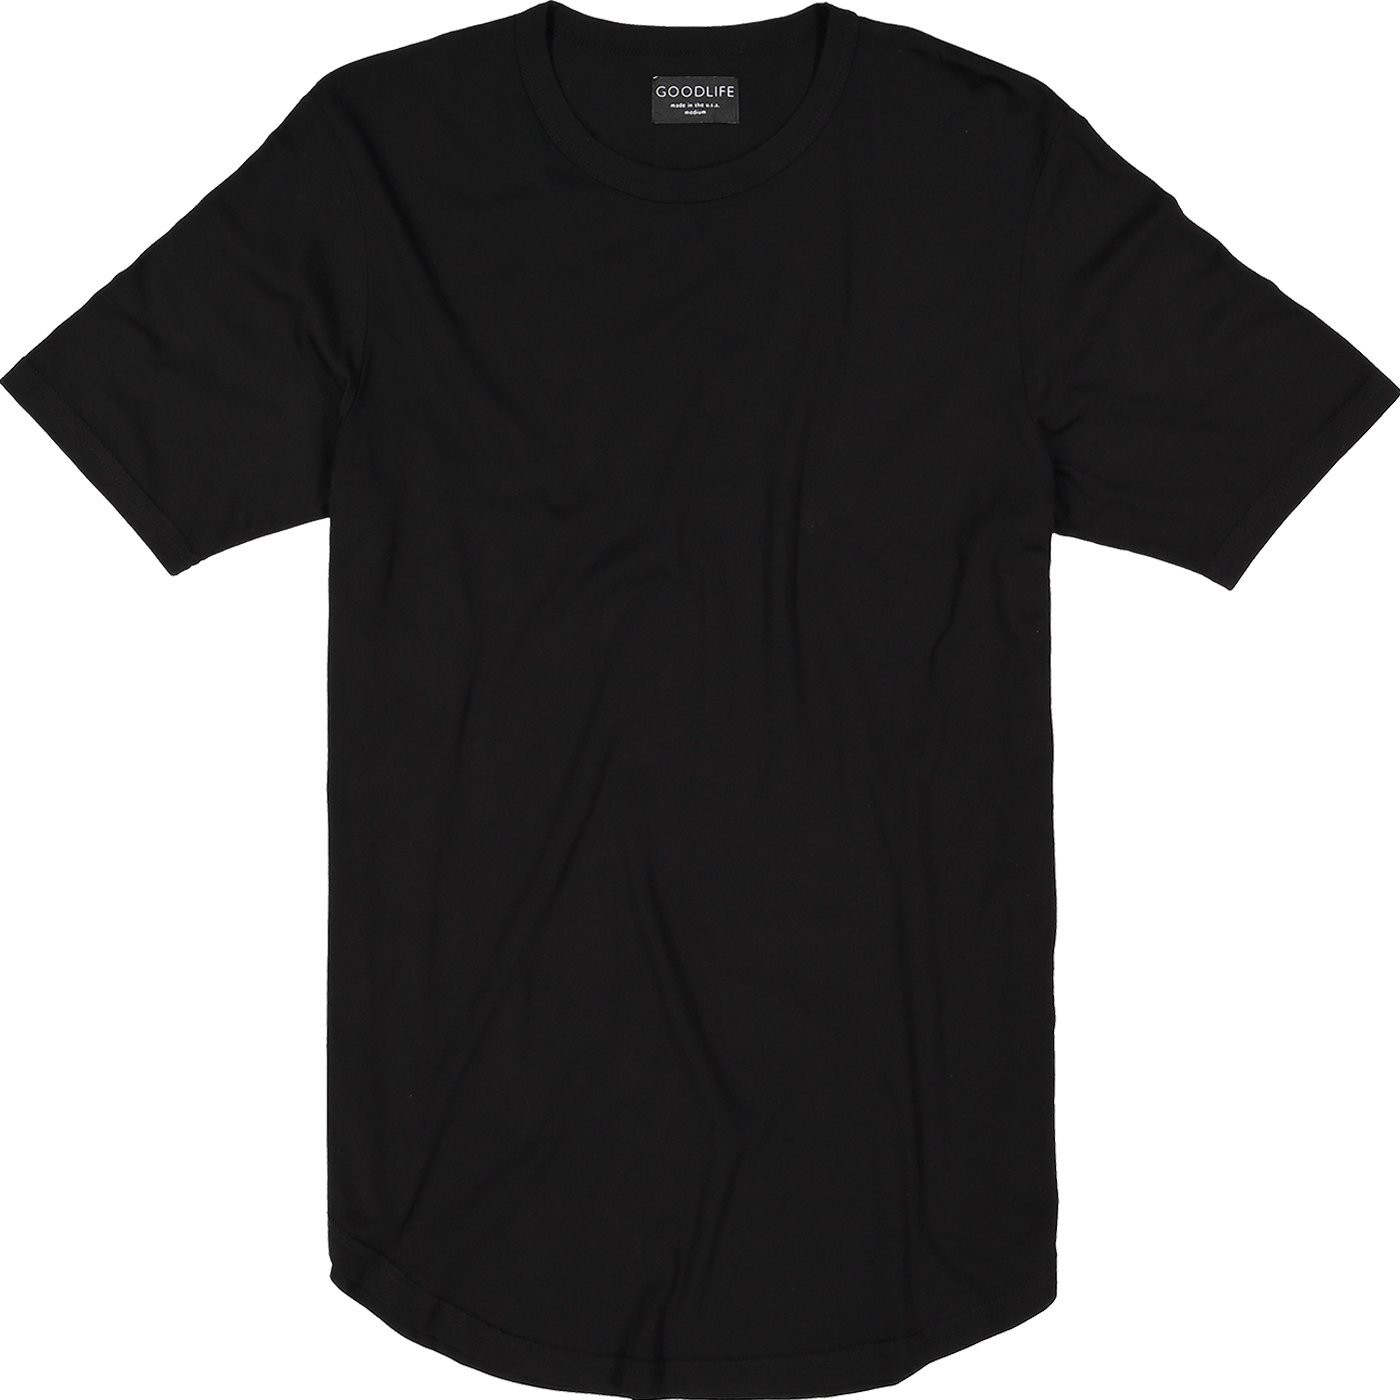 Goodlife Clothing Shirt Review — duuude | Only the Good Stuff- Reviews ...